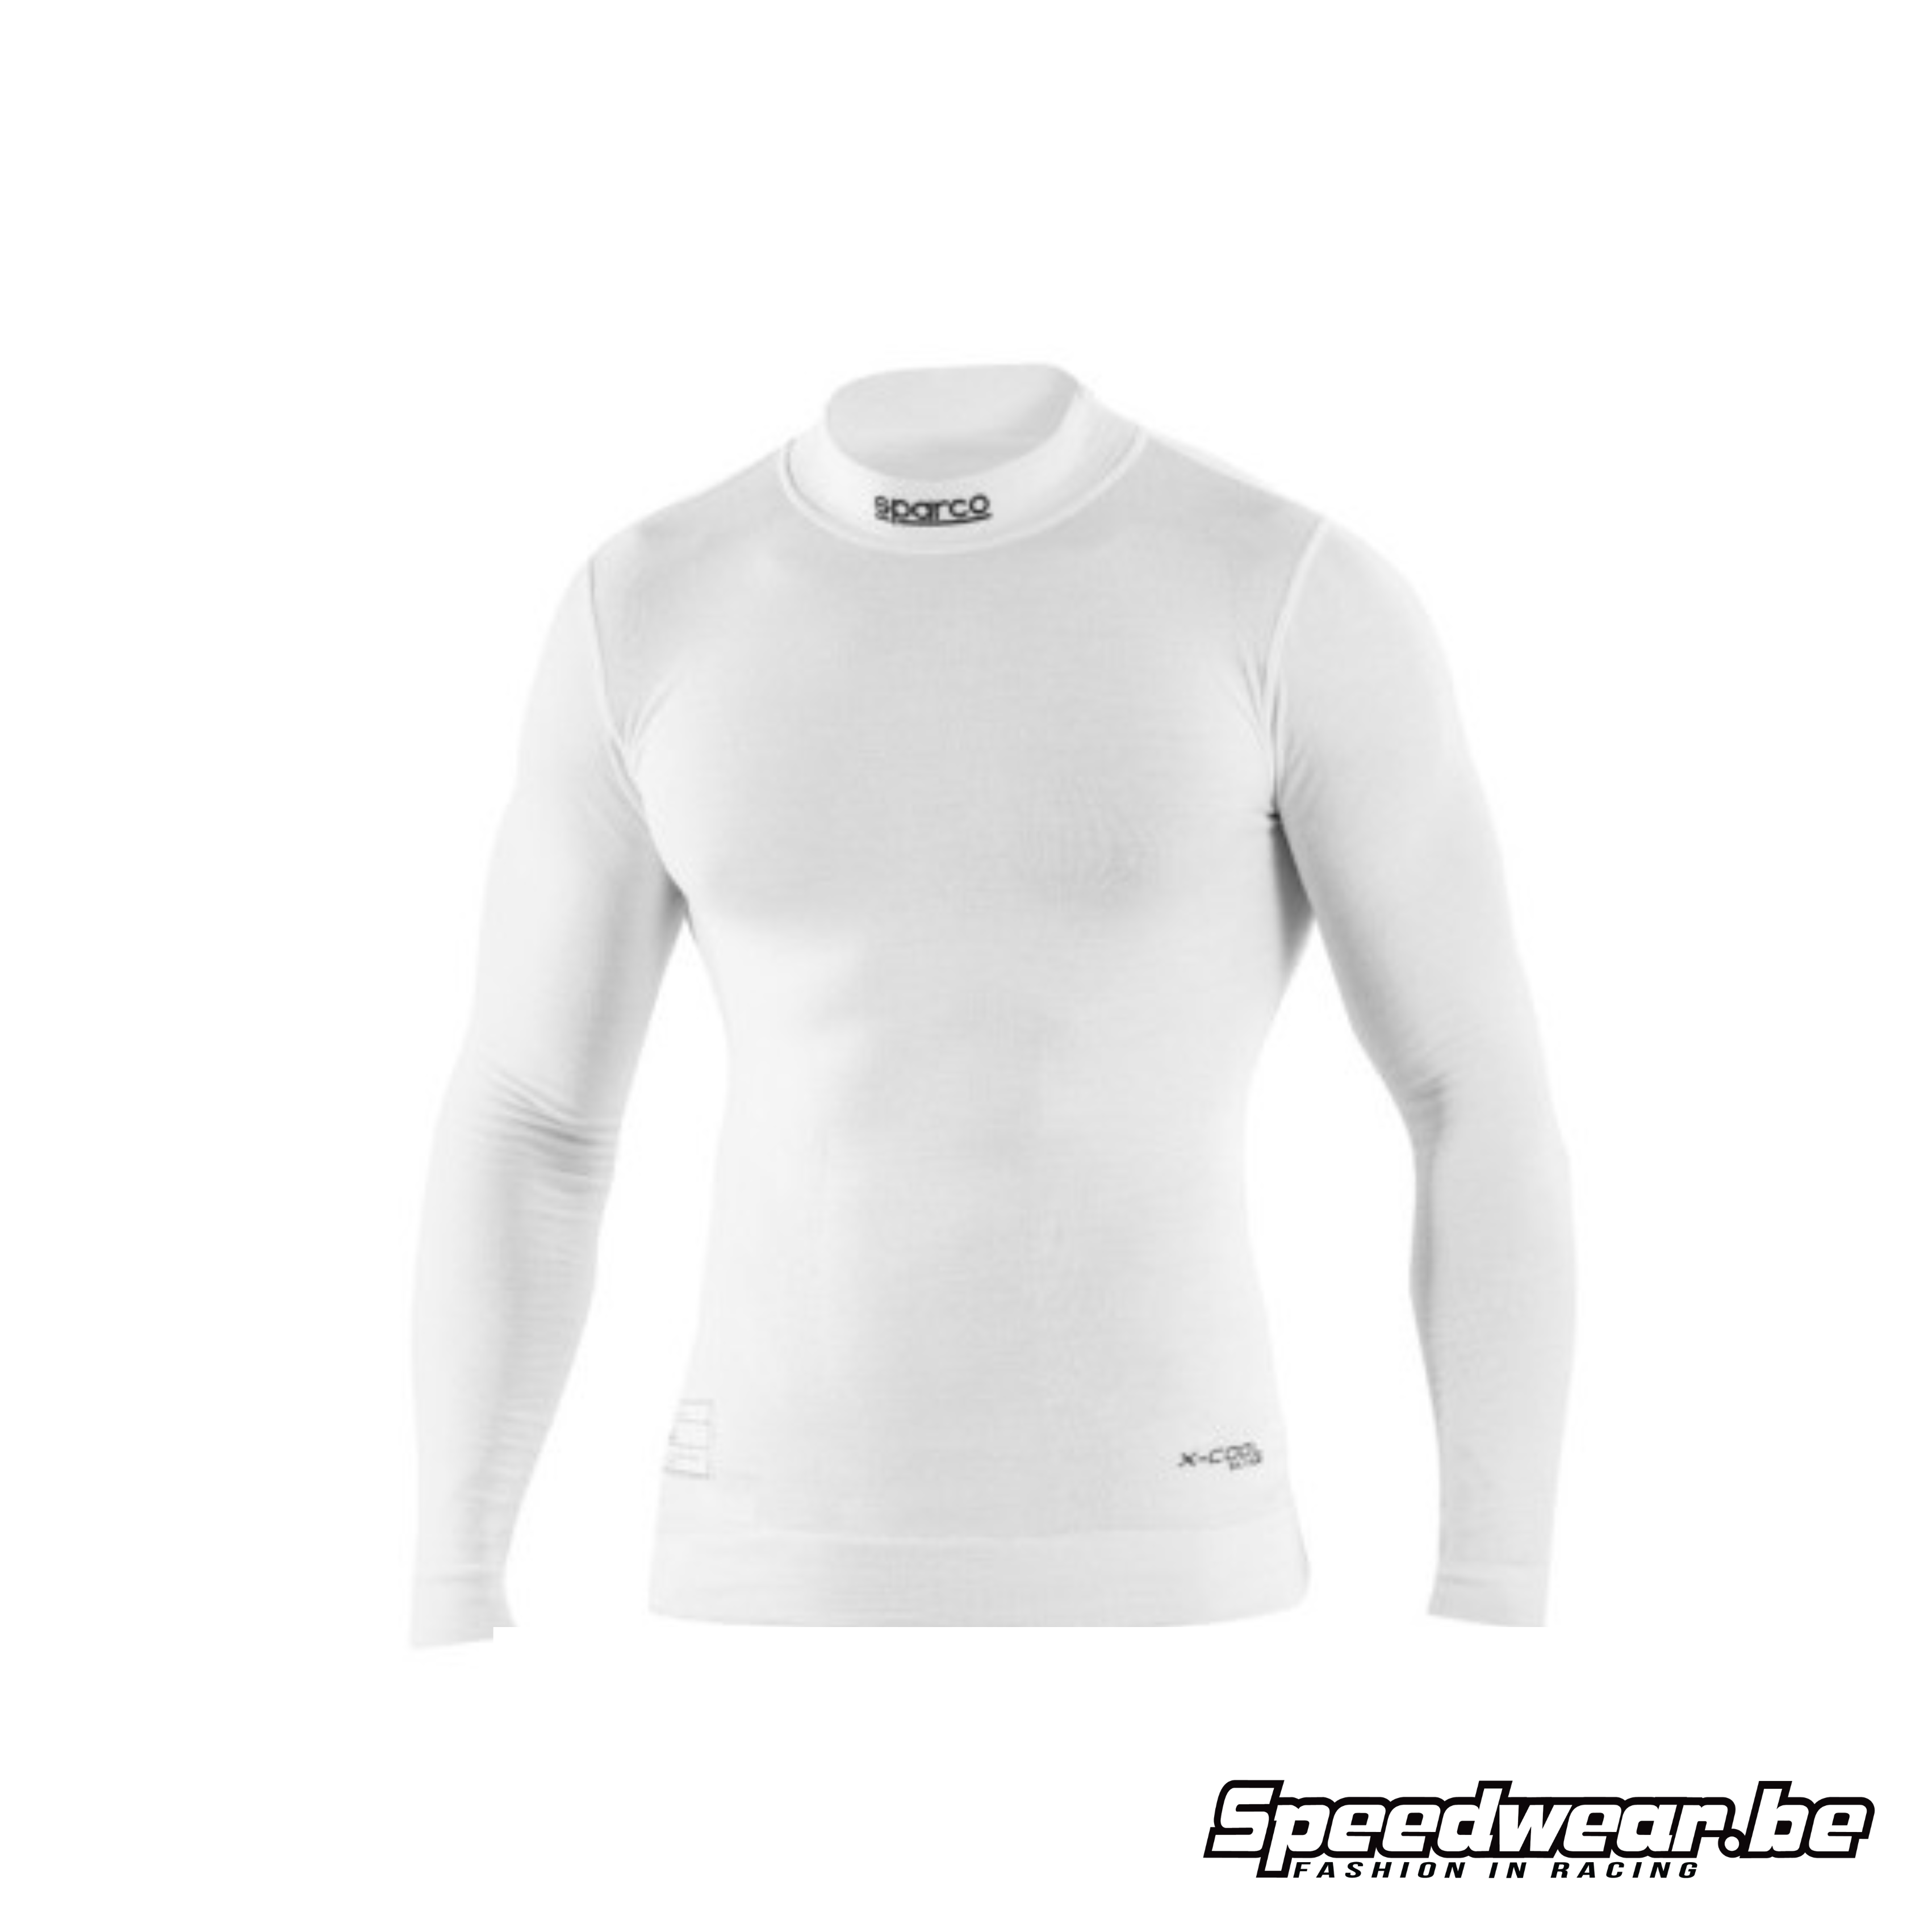 Sparco RW 10 Shield Pro Long Sleeve WIT